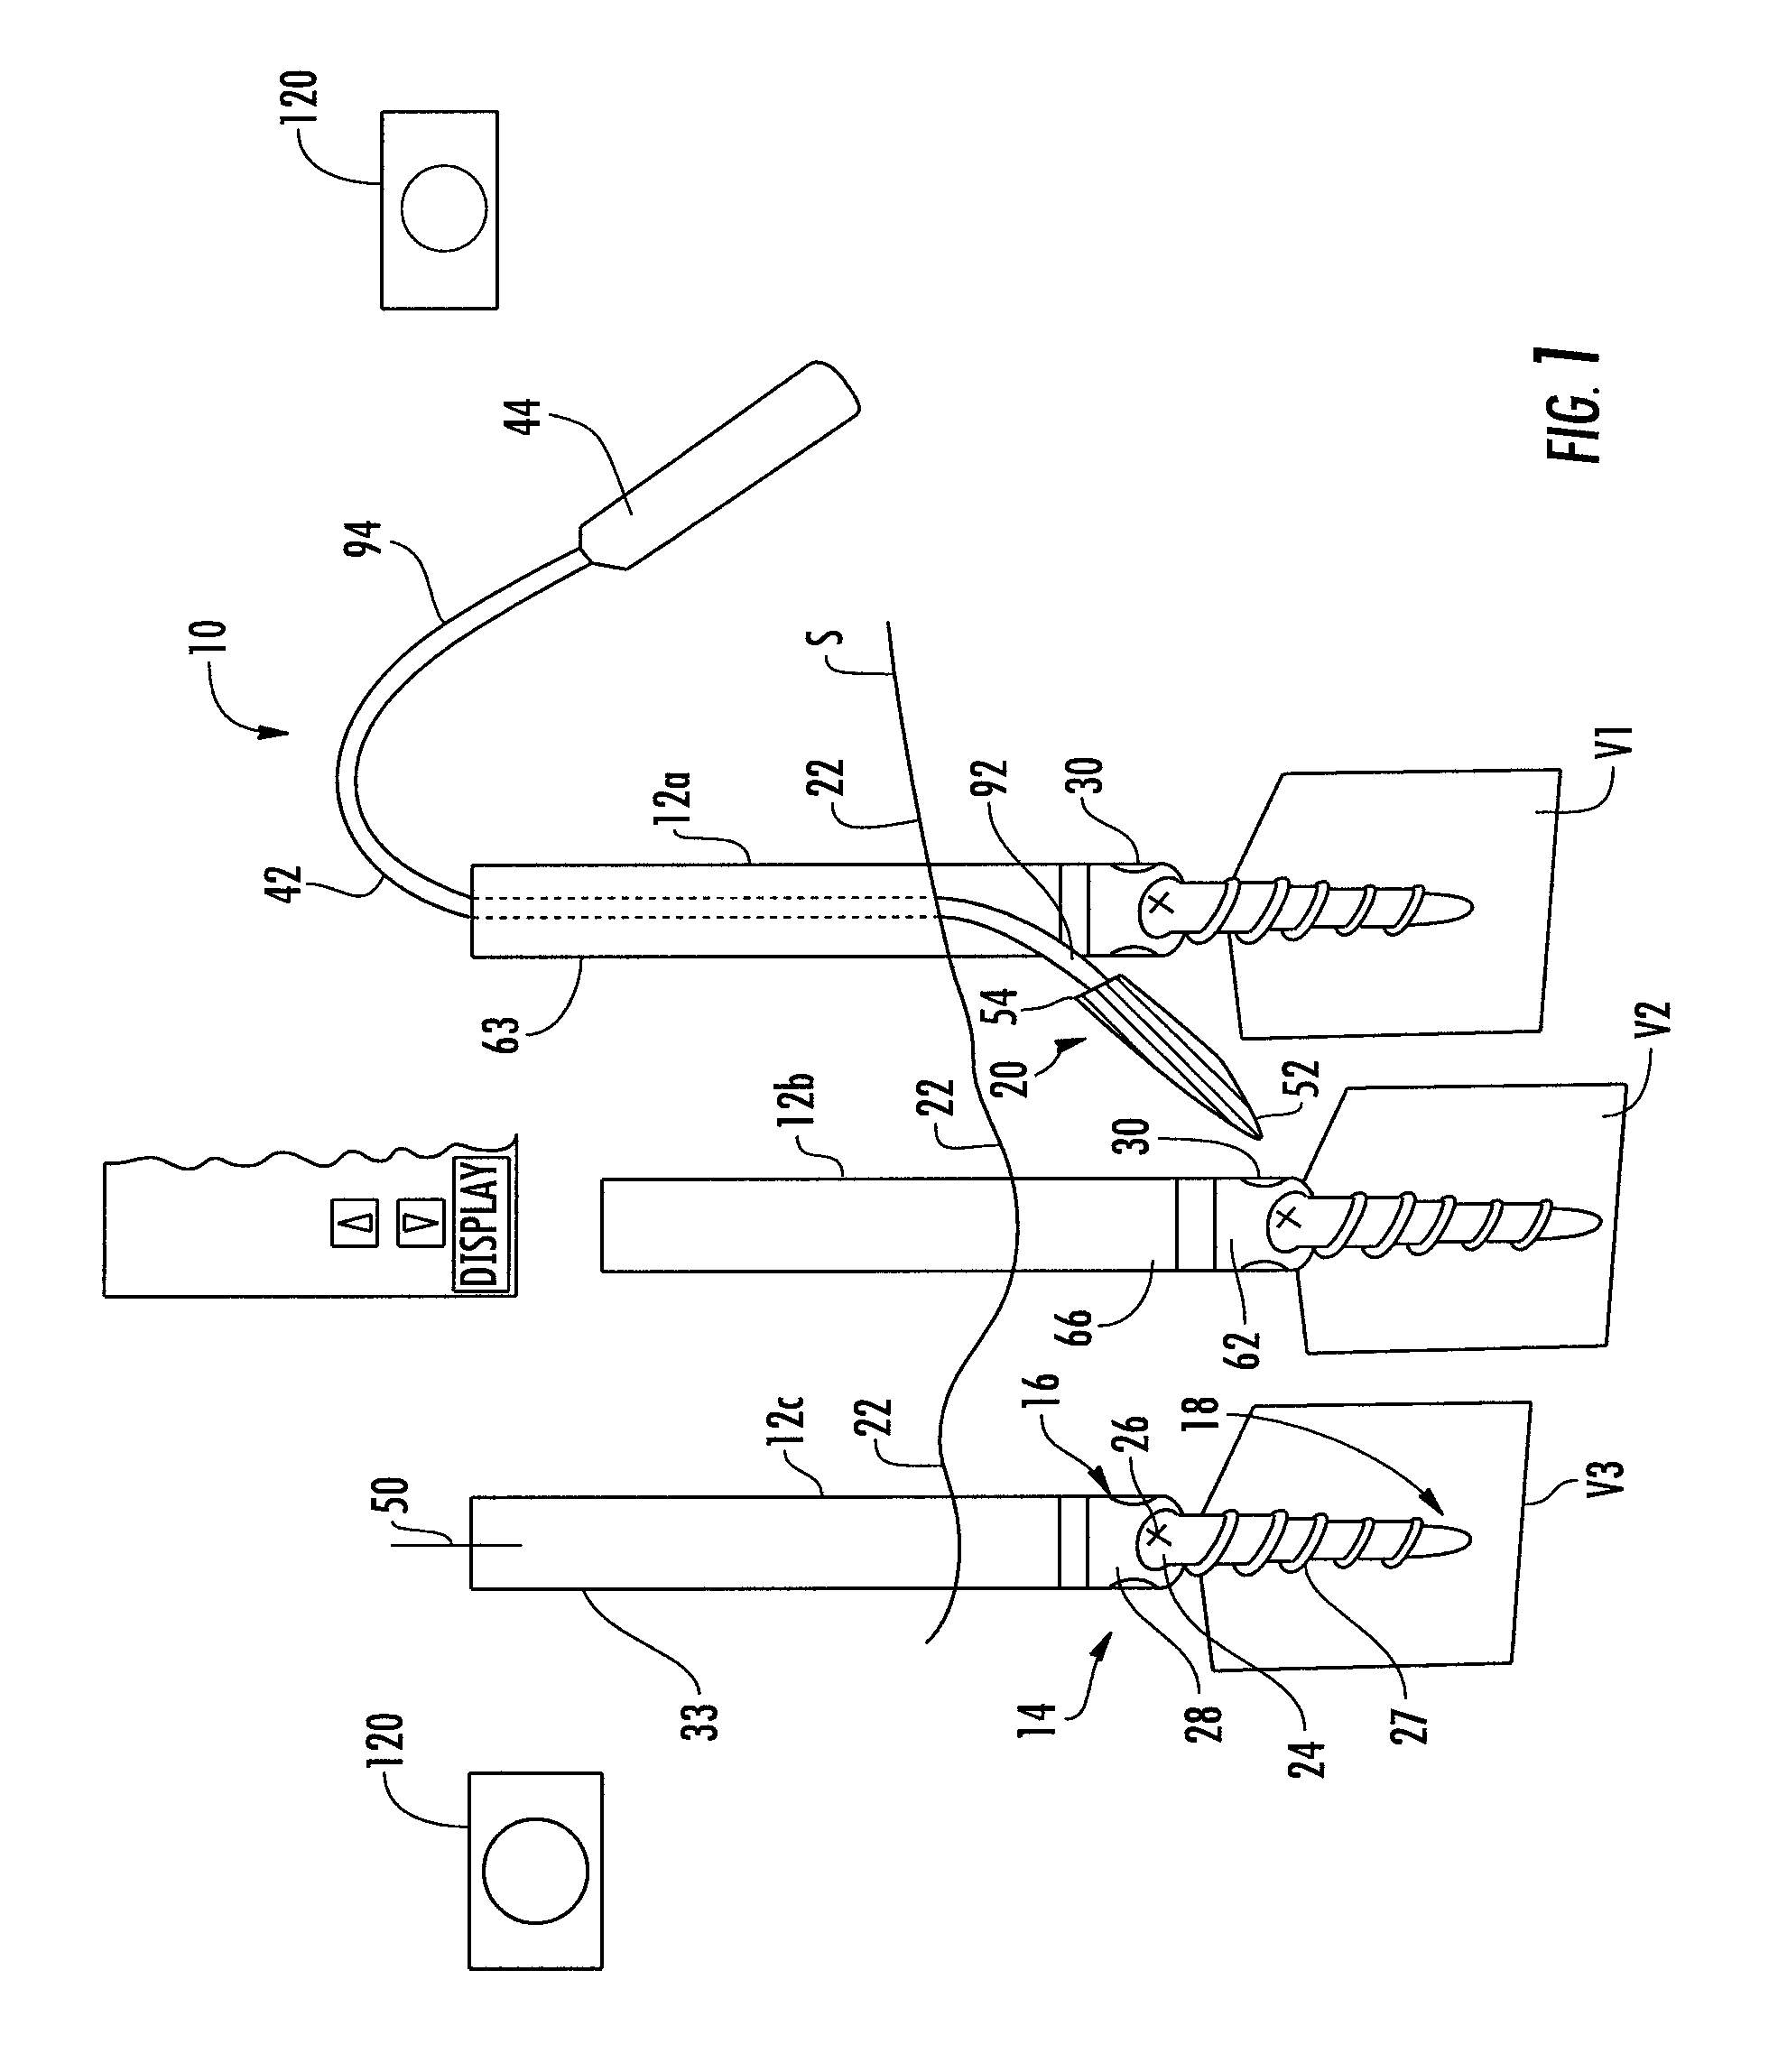 Method and apparatus for facilitating navigation of an implant